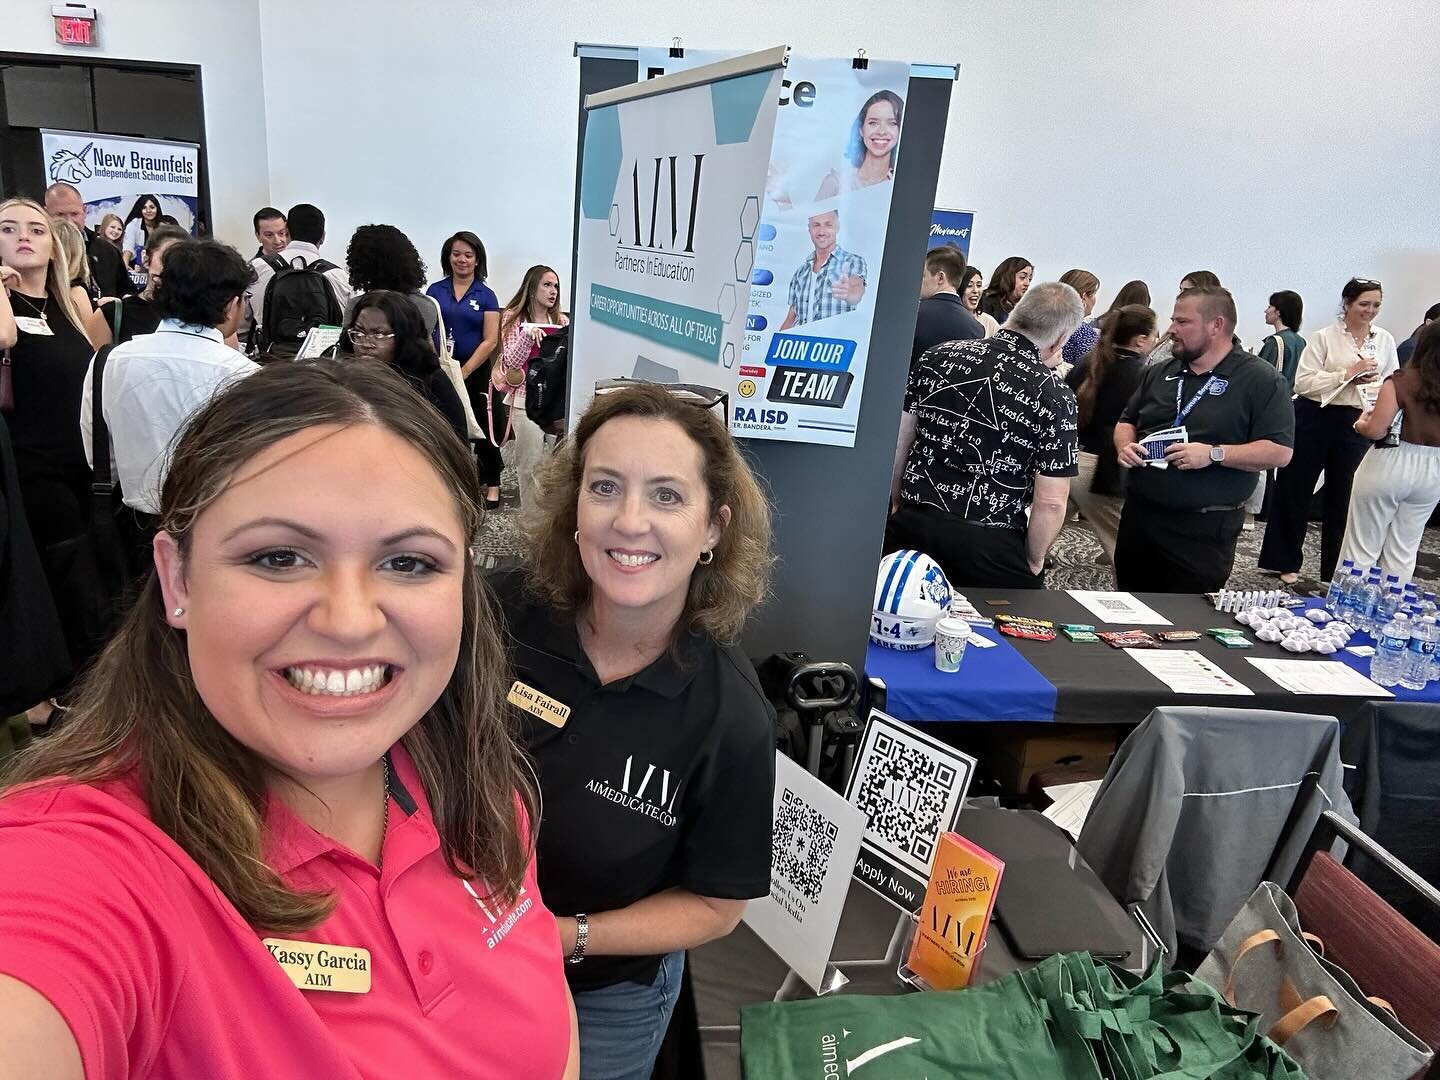 AIM had a busy day yesterday! Not only were we a part of the Texas State University Teacher Job Fair, but we also were able to provide support to Snack Pak 4 Kids. Thank you to all our AIMers for constantly showcasing what AIM is all about. #aim #aim